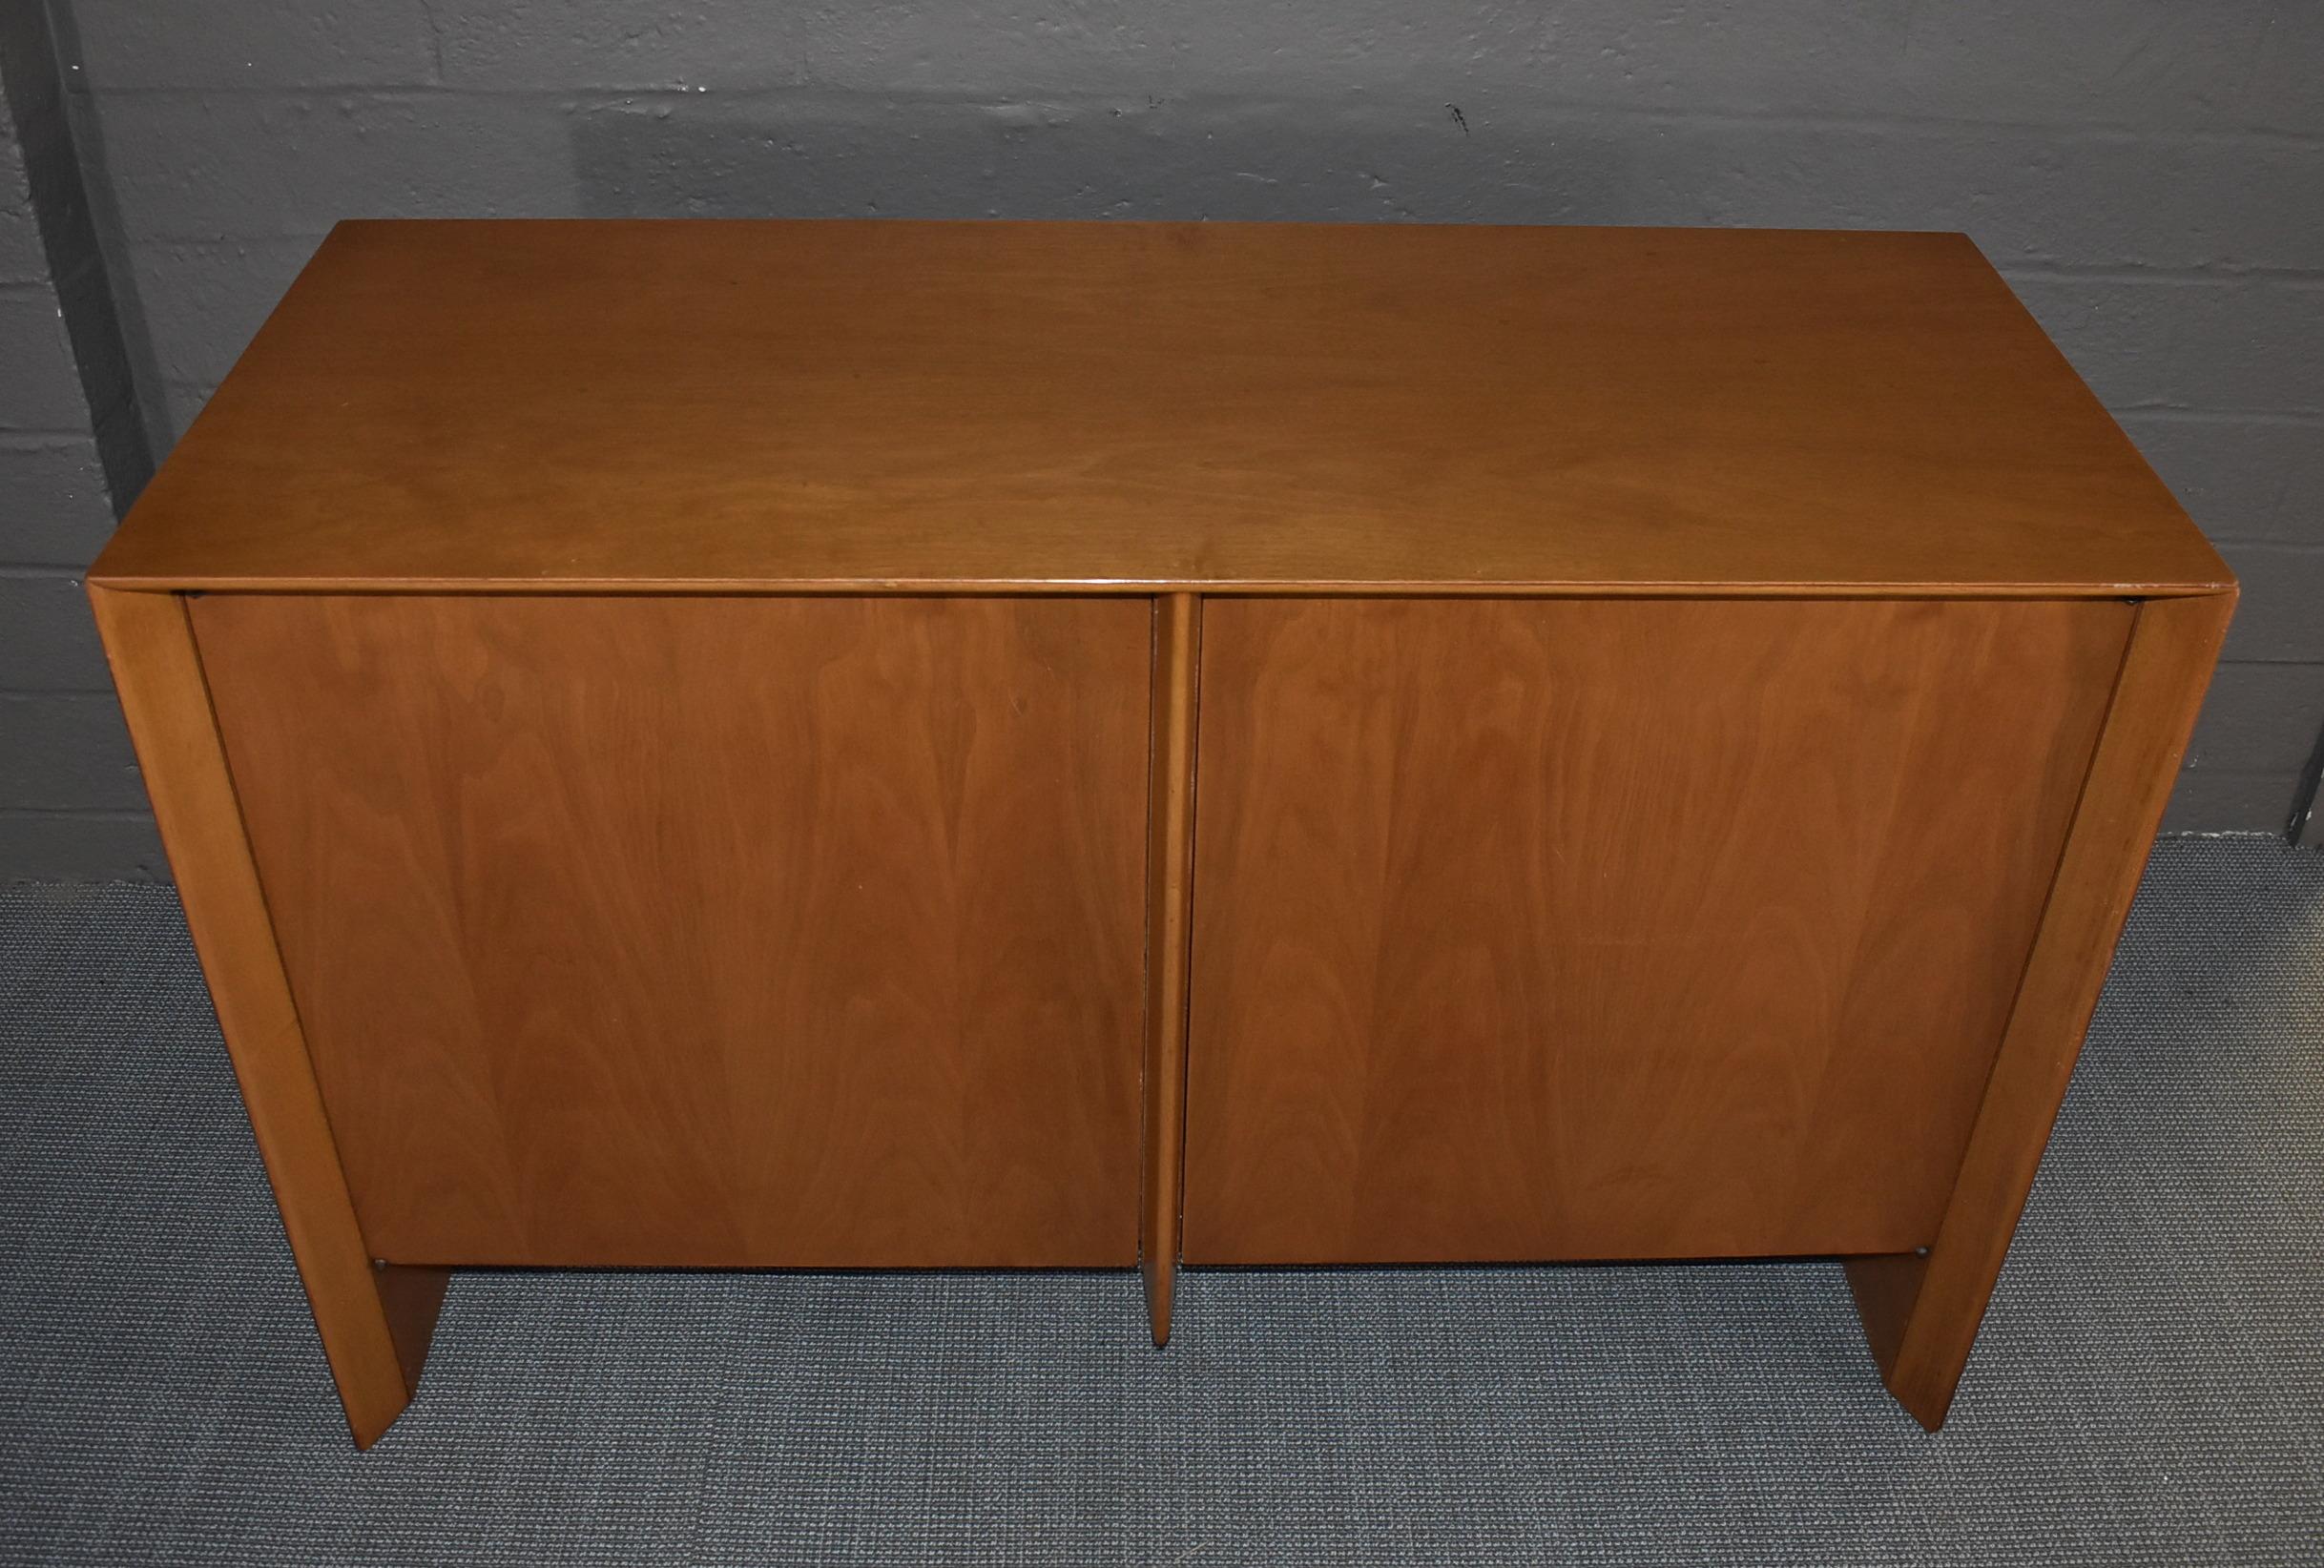 Two-door Mid-Century Modern credenza by T. H. Robsjohn-Gibbings for Widdicomb. Made from walnut and has three interior drawers. Adjustable interior shelves. Original finish. Some surface wear to the top. 48.5